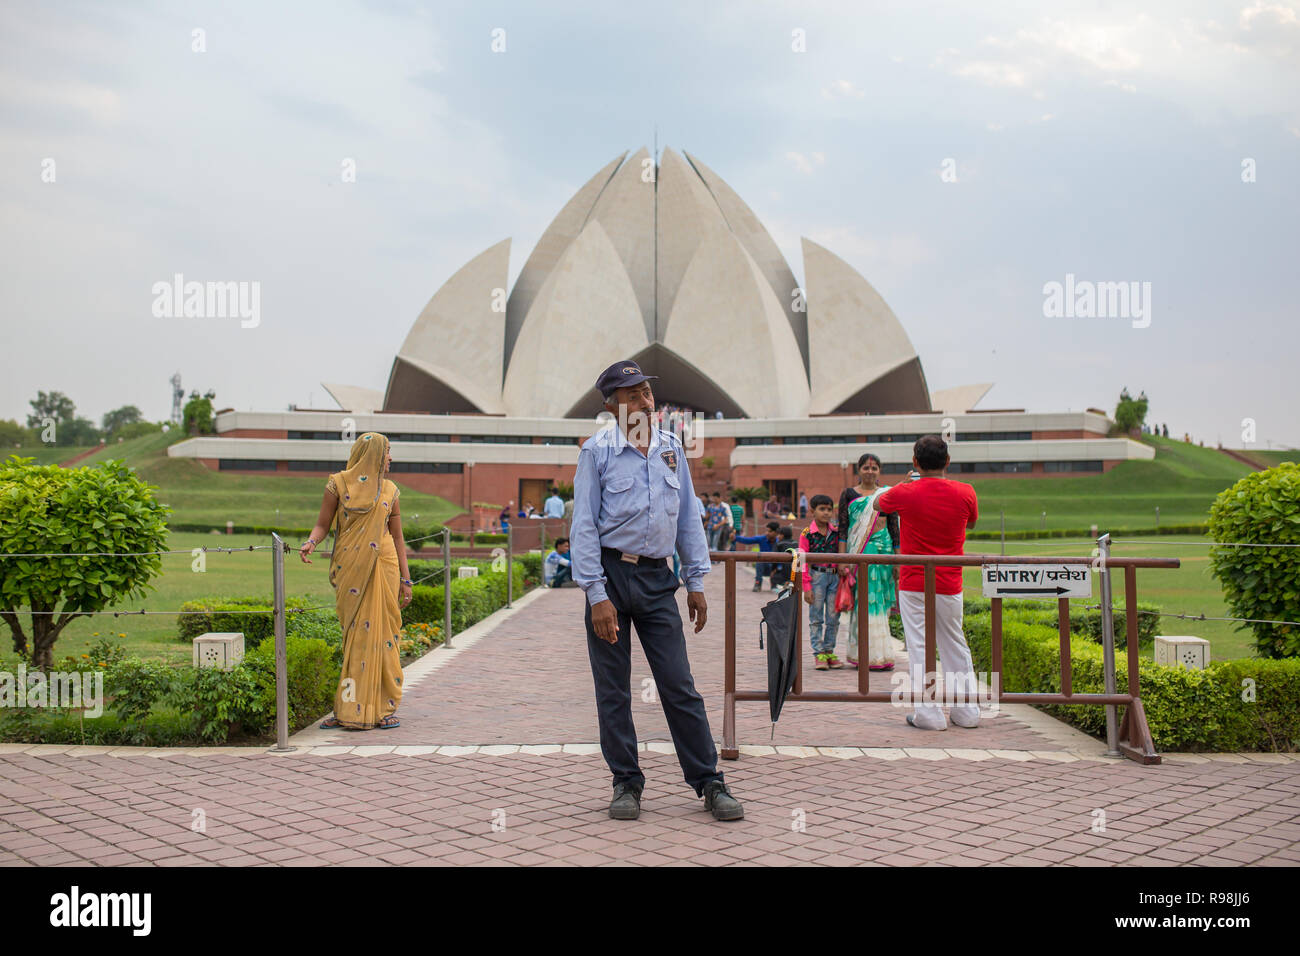 Delhi, India - May 23, 2017: Indian man guards entrance to the famous Lotus Temple or Bahai House of Worship   in New Delhi, India. Stock Photo